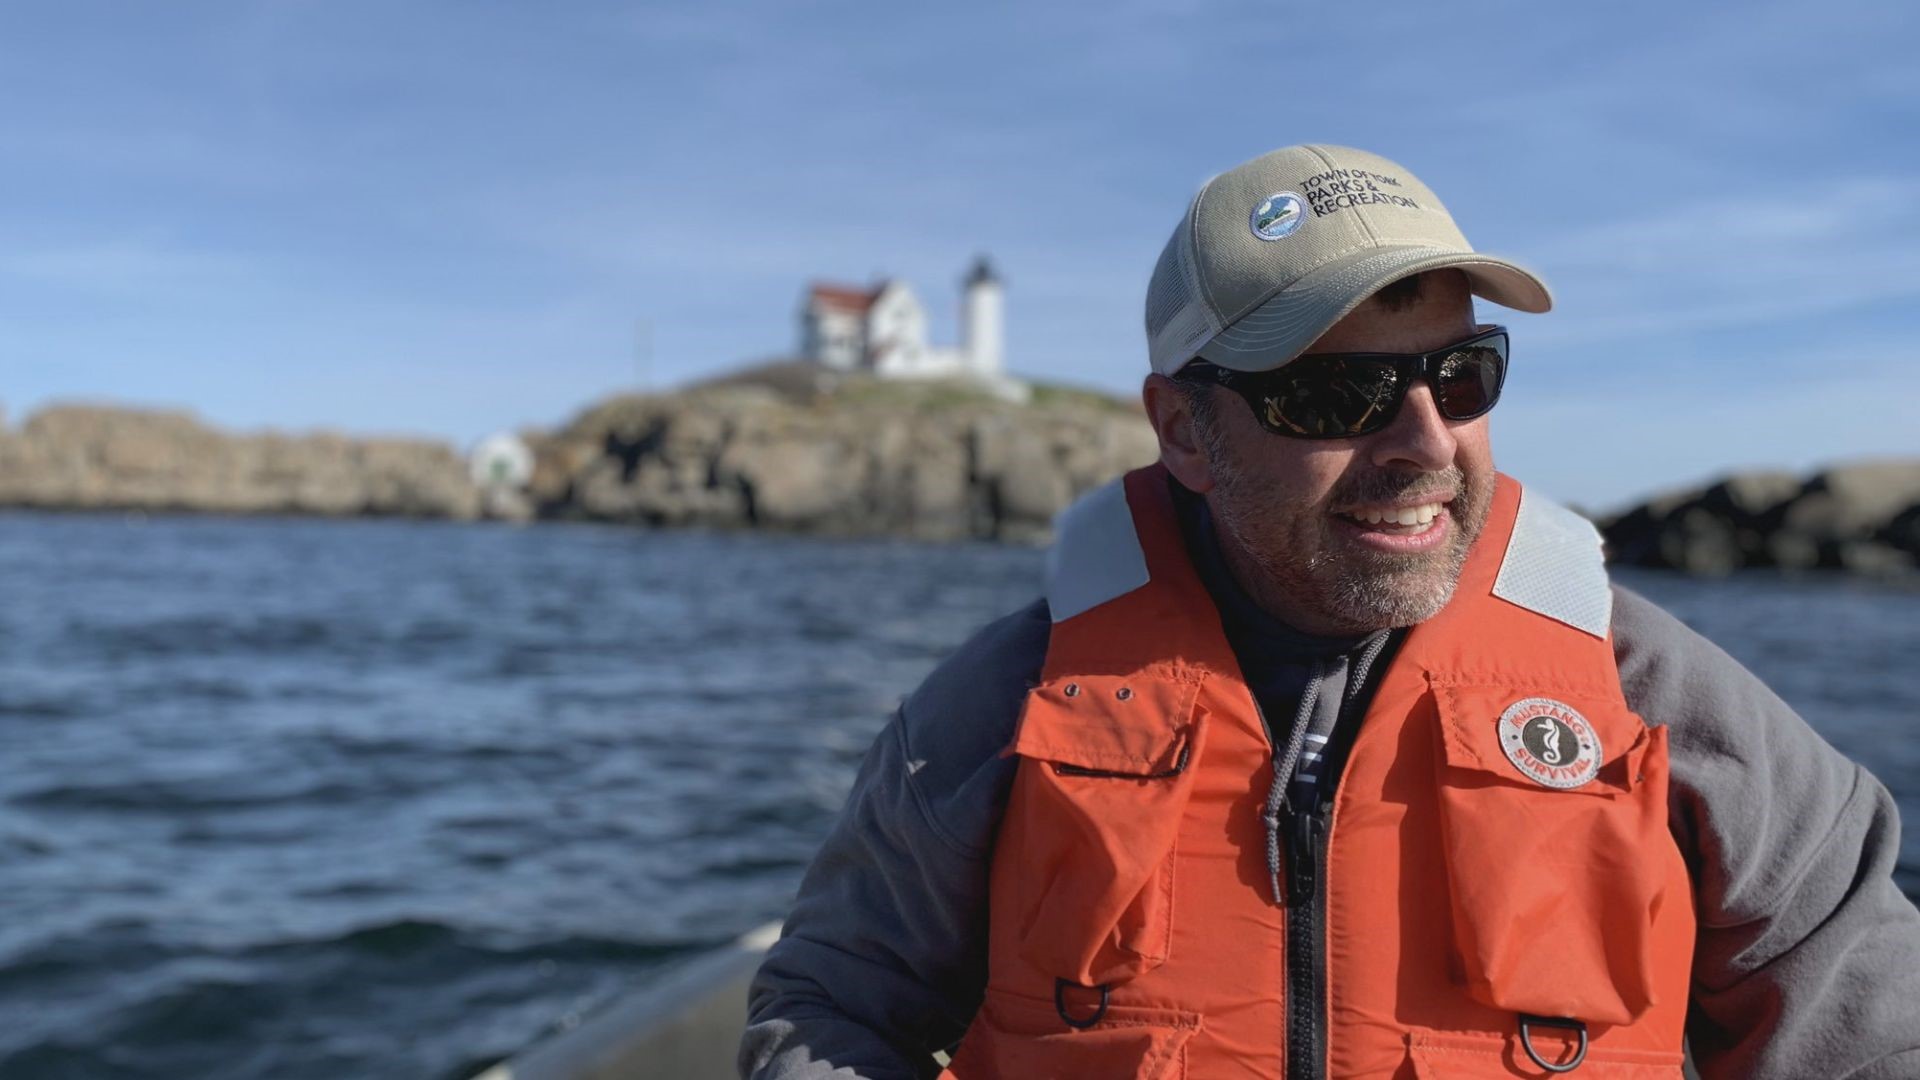 Matt Rosenberg is both a high school English teacher and the man behind one of Maine's most iconic lighthouses.